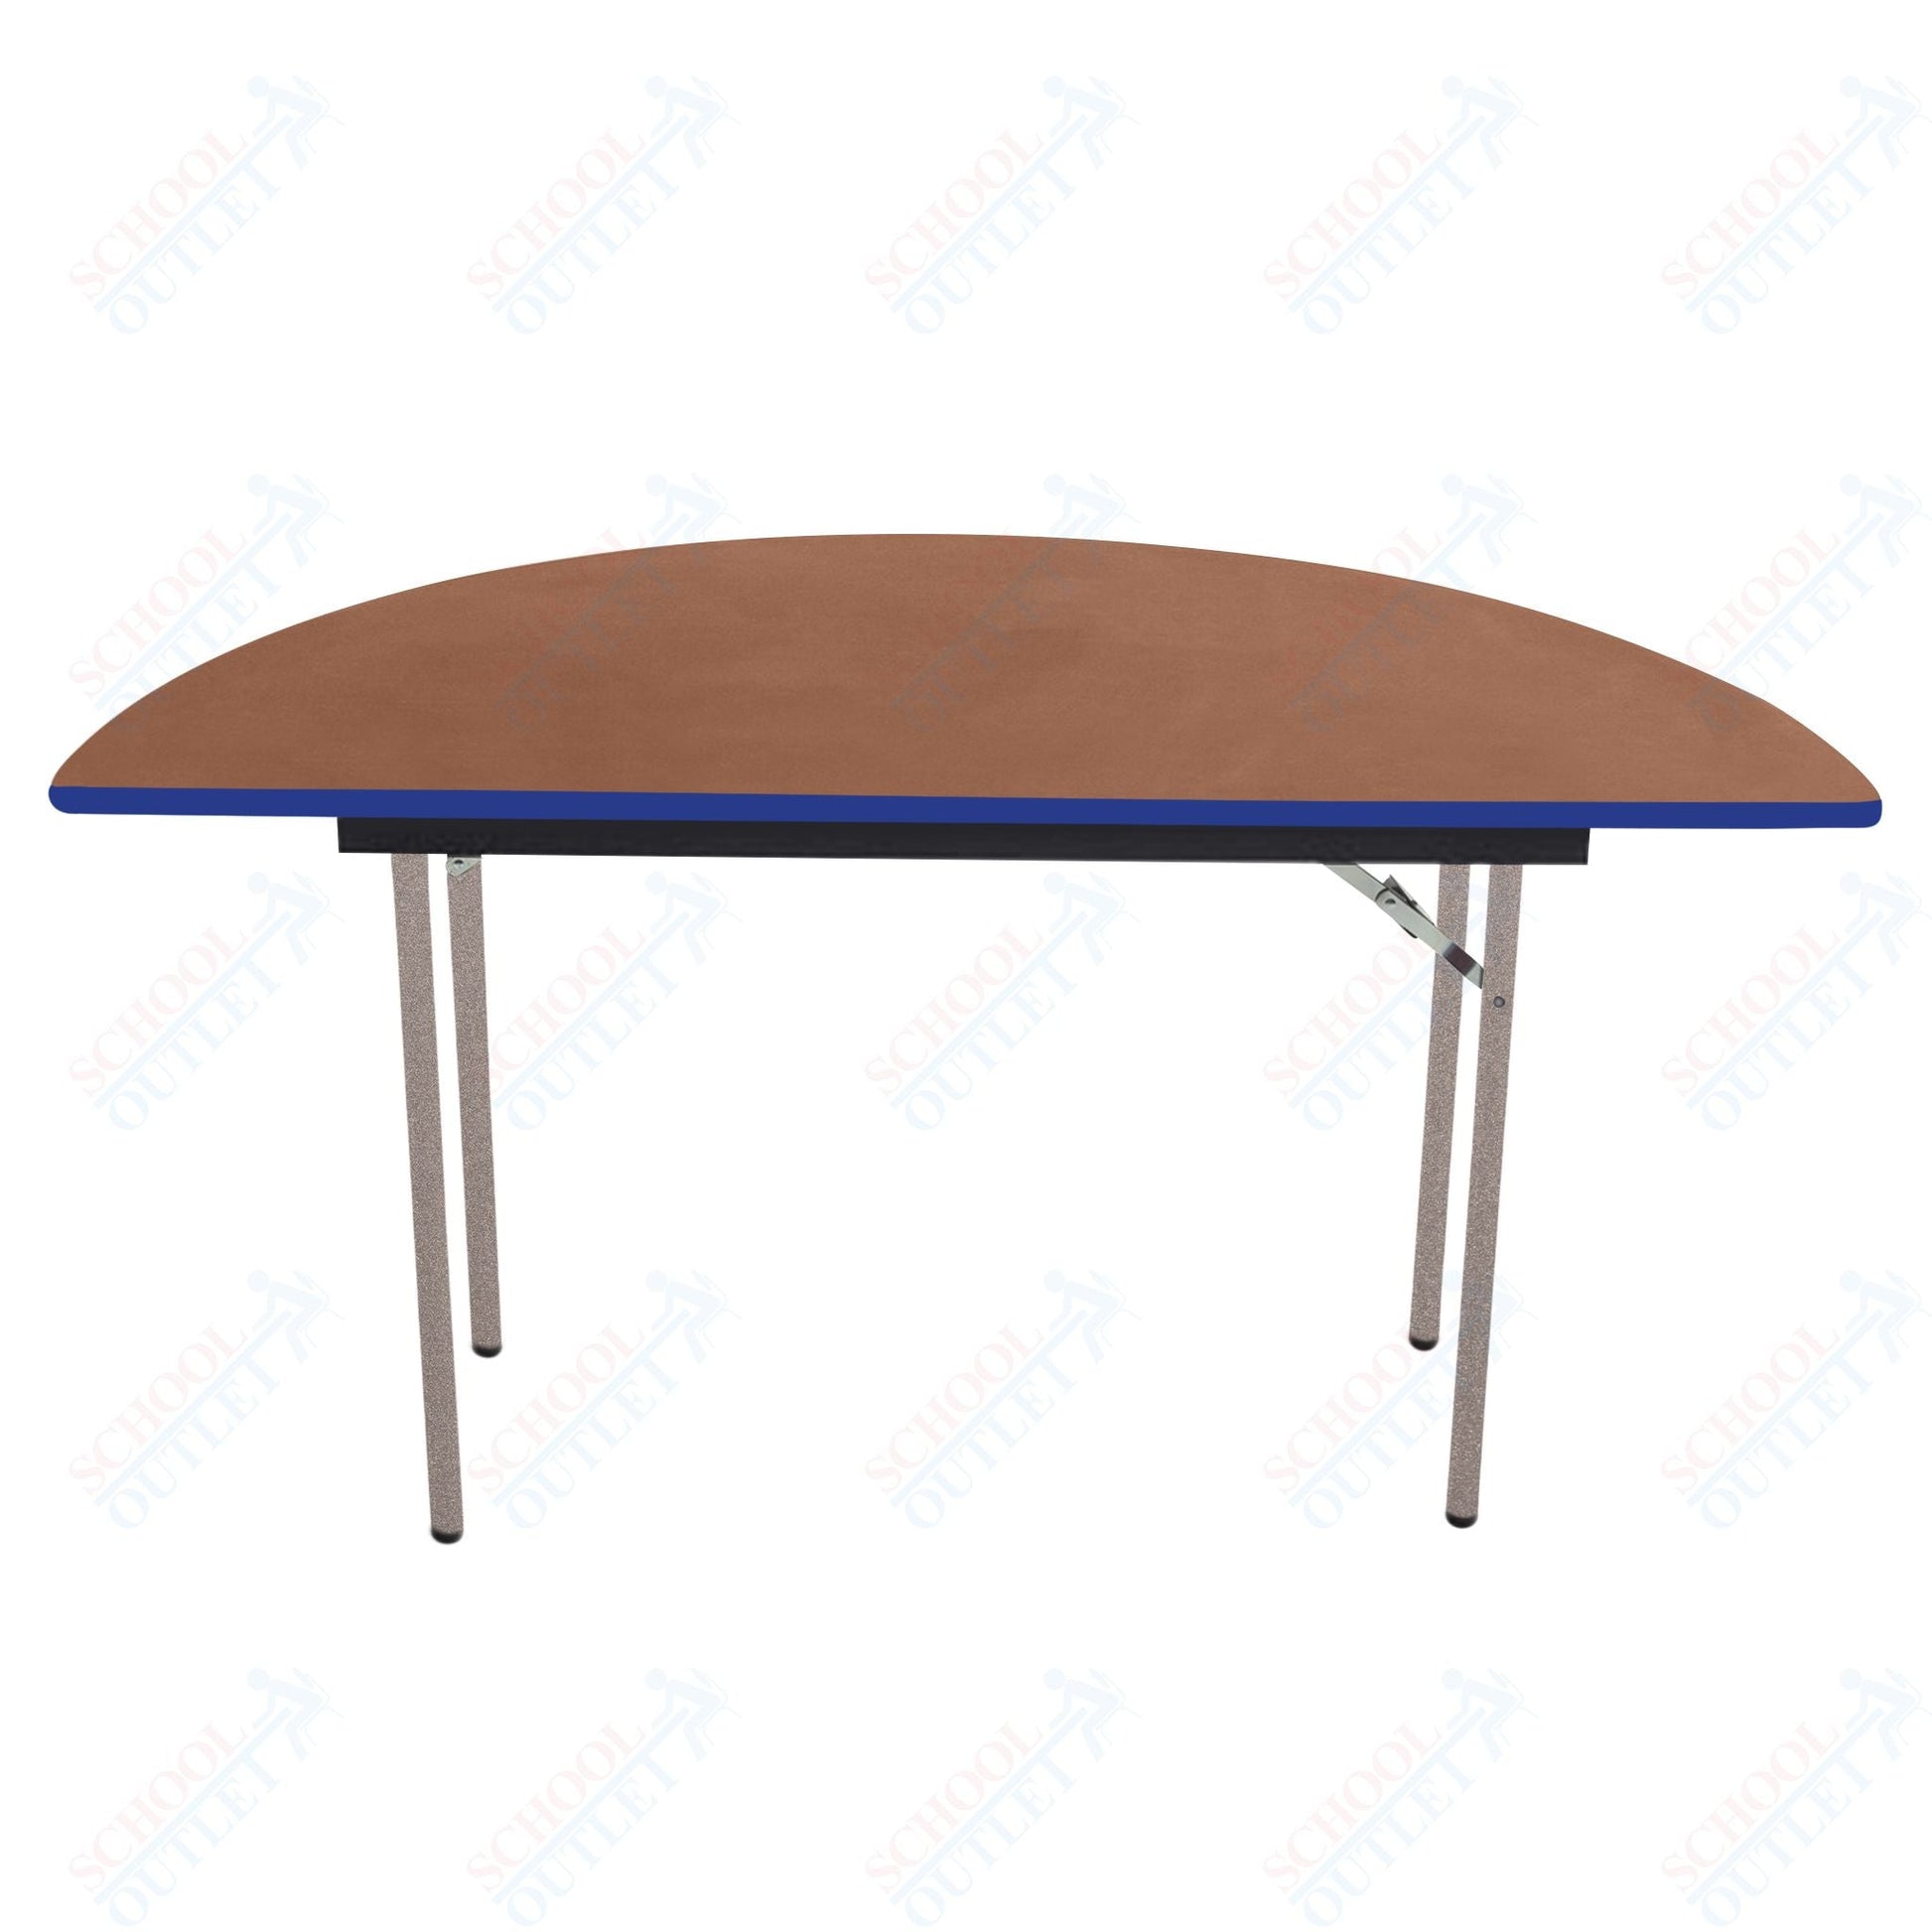 AmTab Folding Table - Plywood Stained and Sealed - Vinyl T - Molding Edge - Half Round - Half 72" Diameter x 29"H (AmTab AMT - HR72PM) - SchoolOutlet